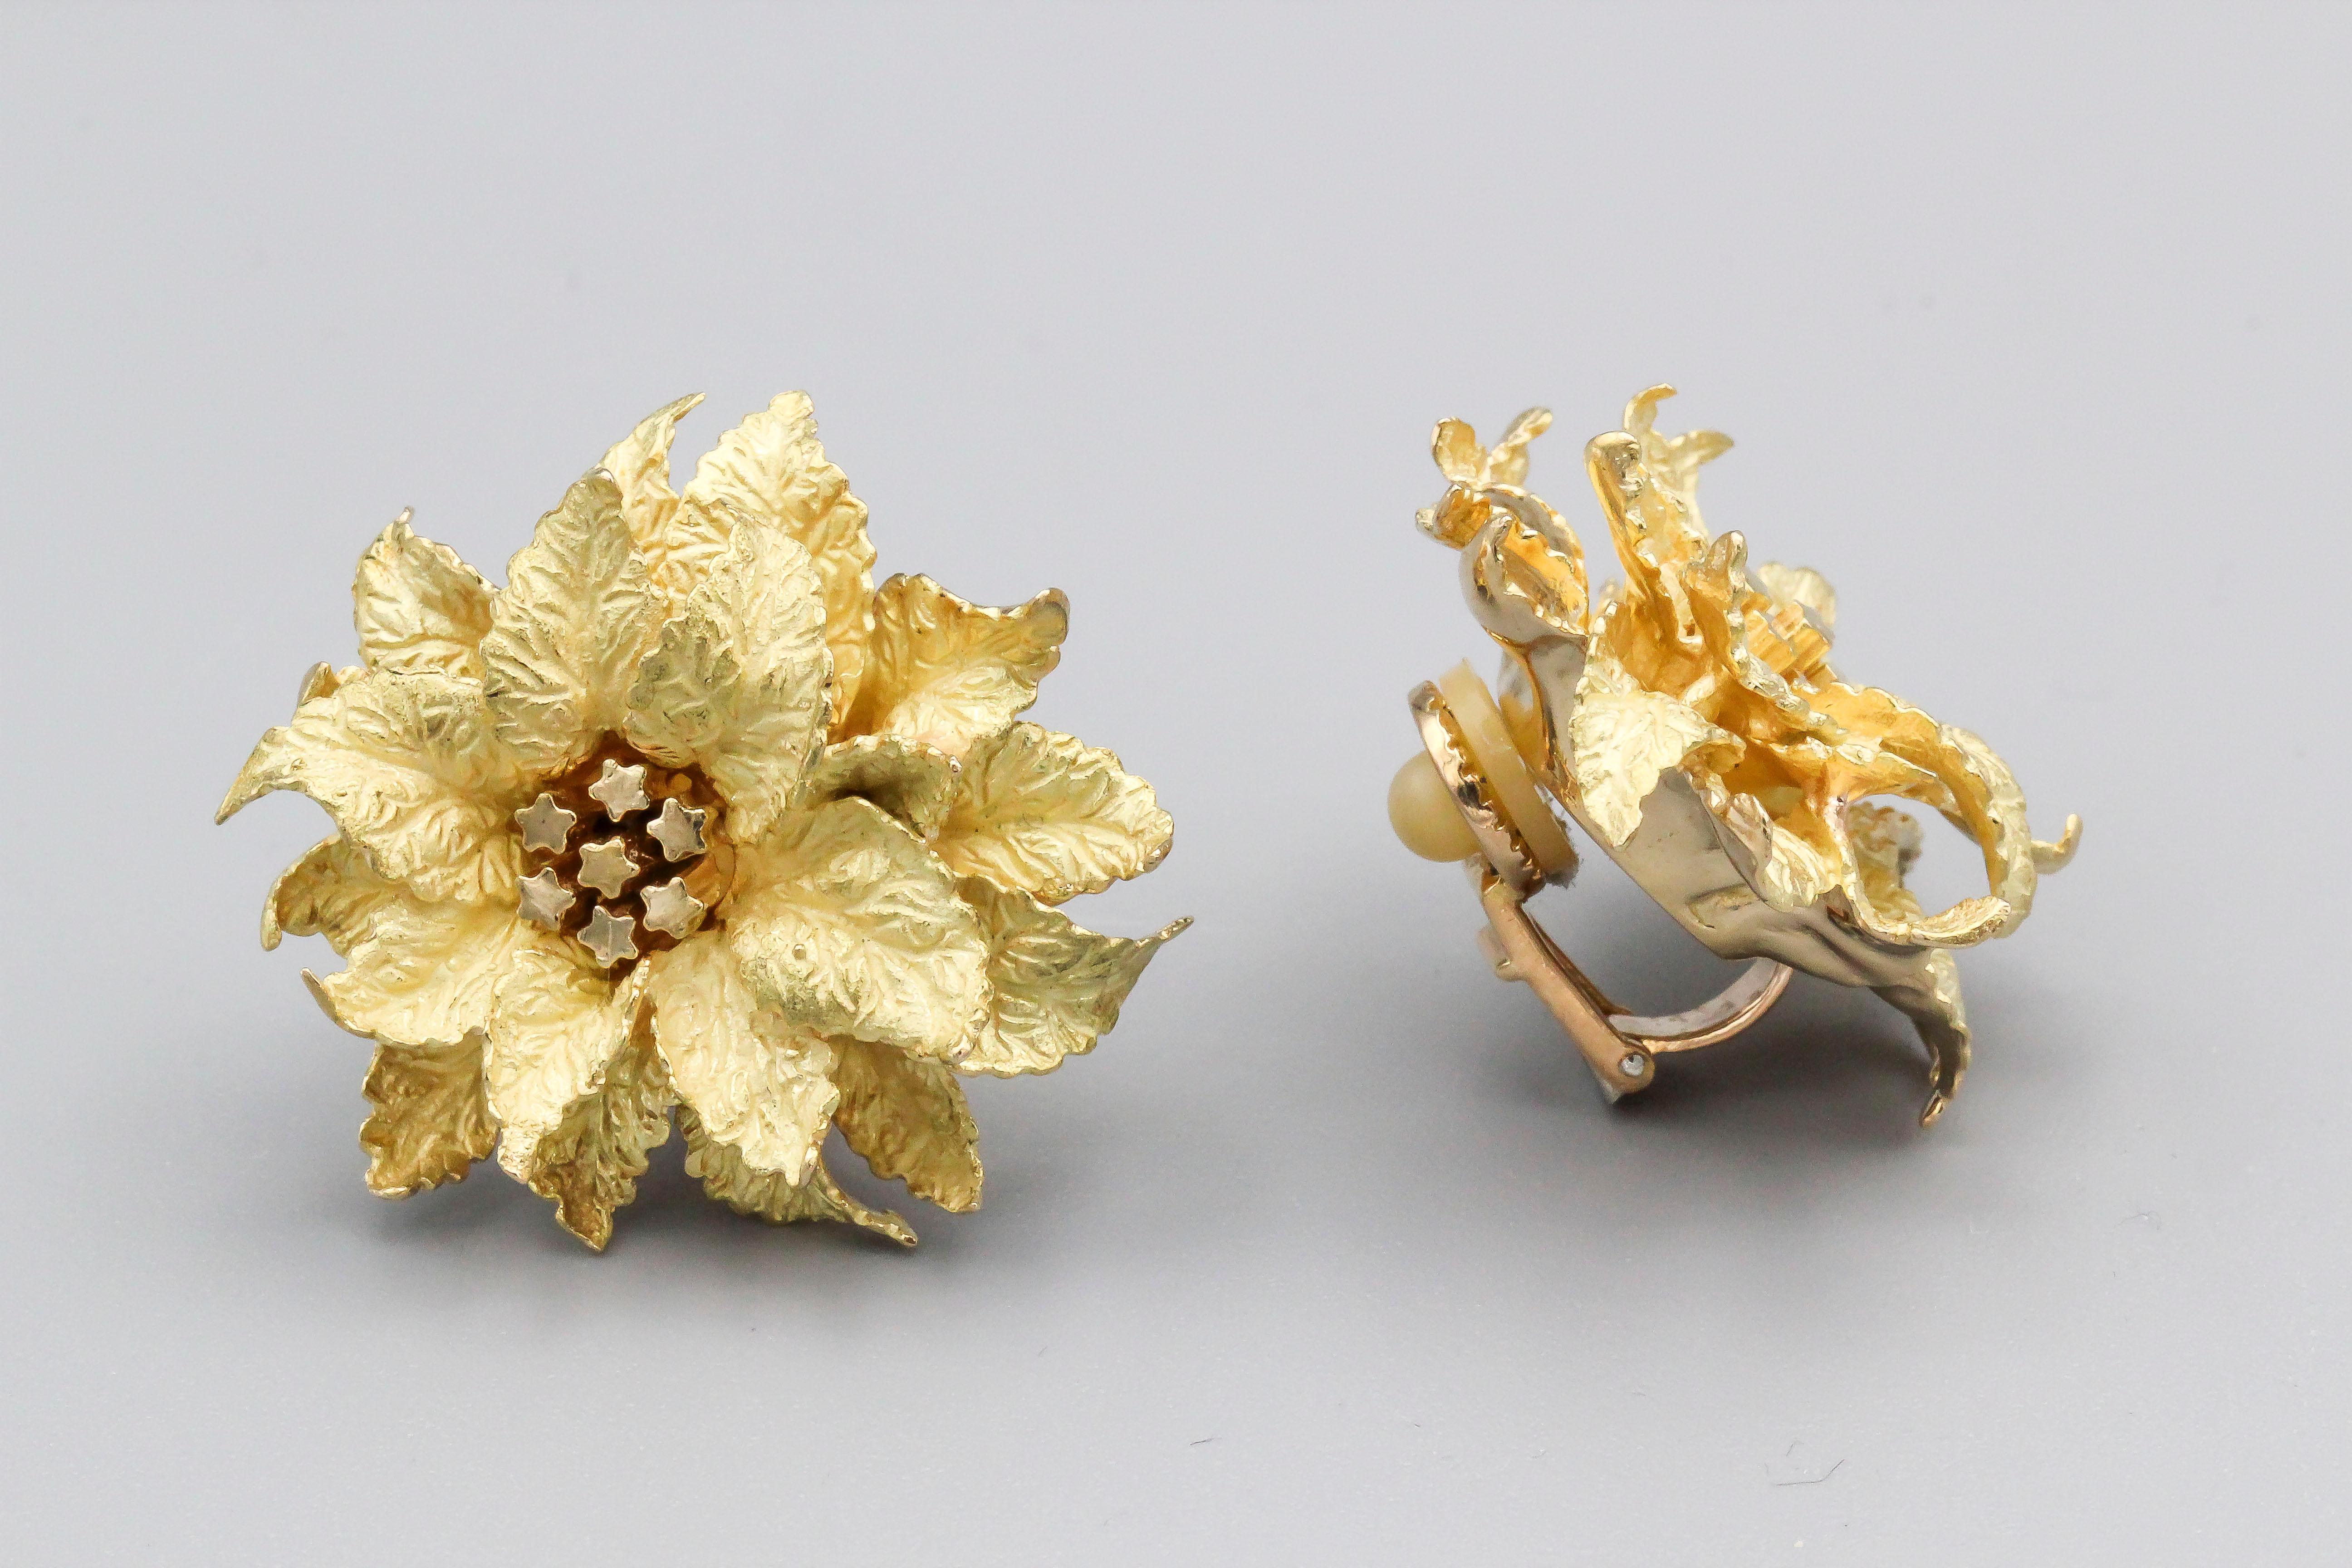 Fine 18K yellow gold earrings by Hermes. They resemble flowers with several small stars coming out of the middle. Circa 1970s.

Hallmarks: Hermes Paris, French 18K gold assay mark.